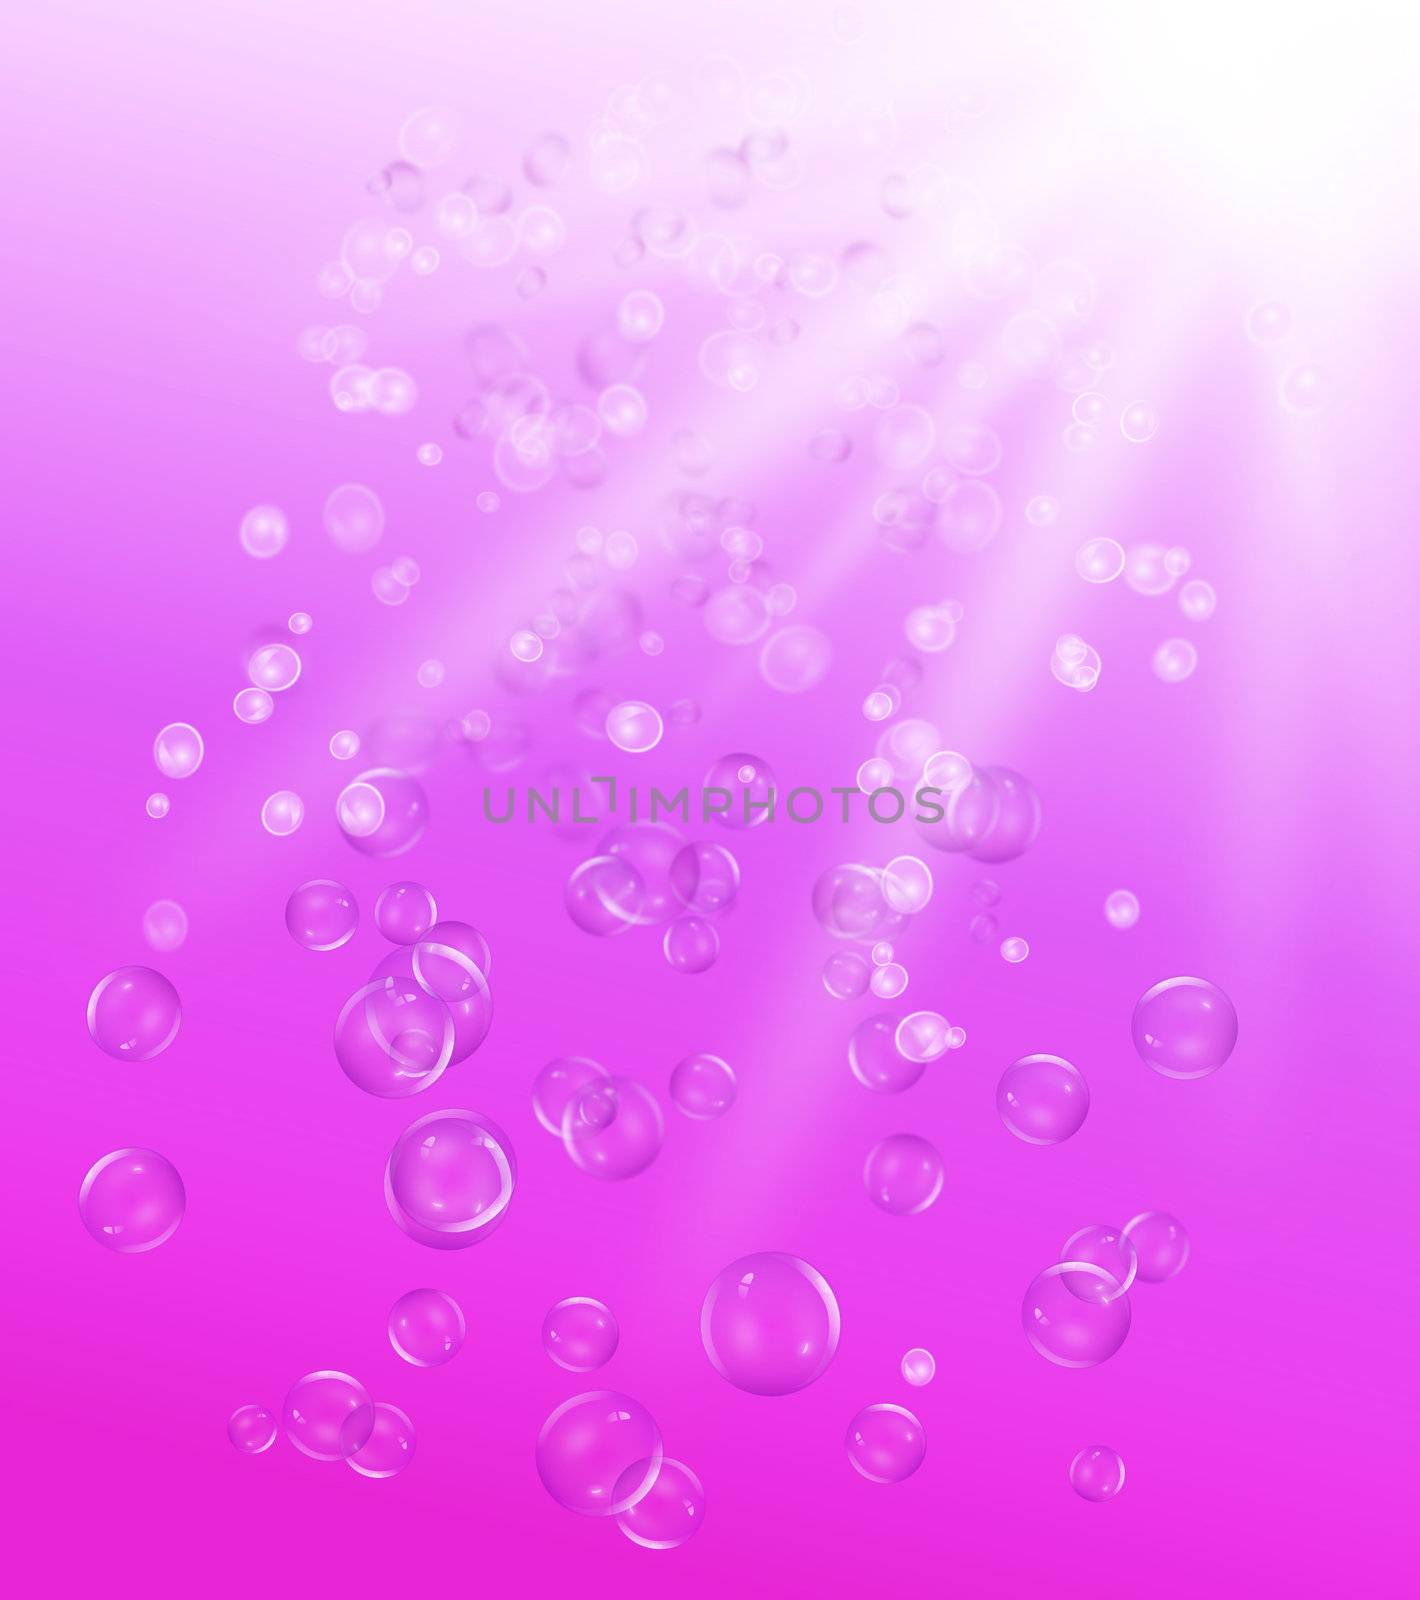 illustration depicting many air bubbles rising from the depths of a violet body of water towards the surface.